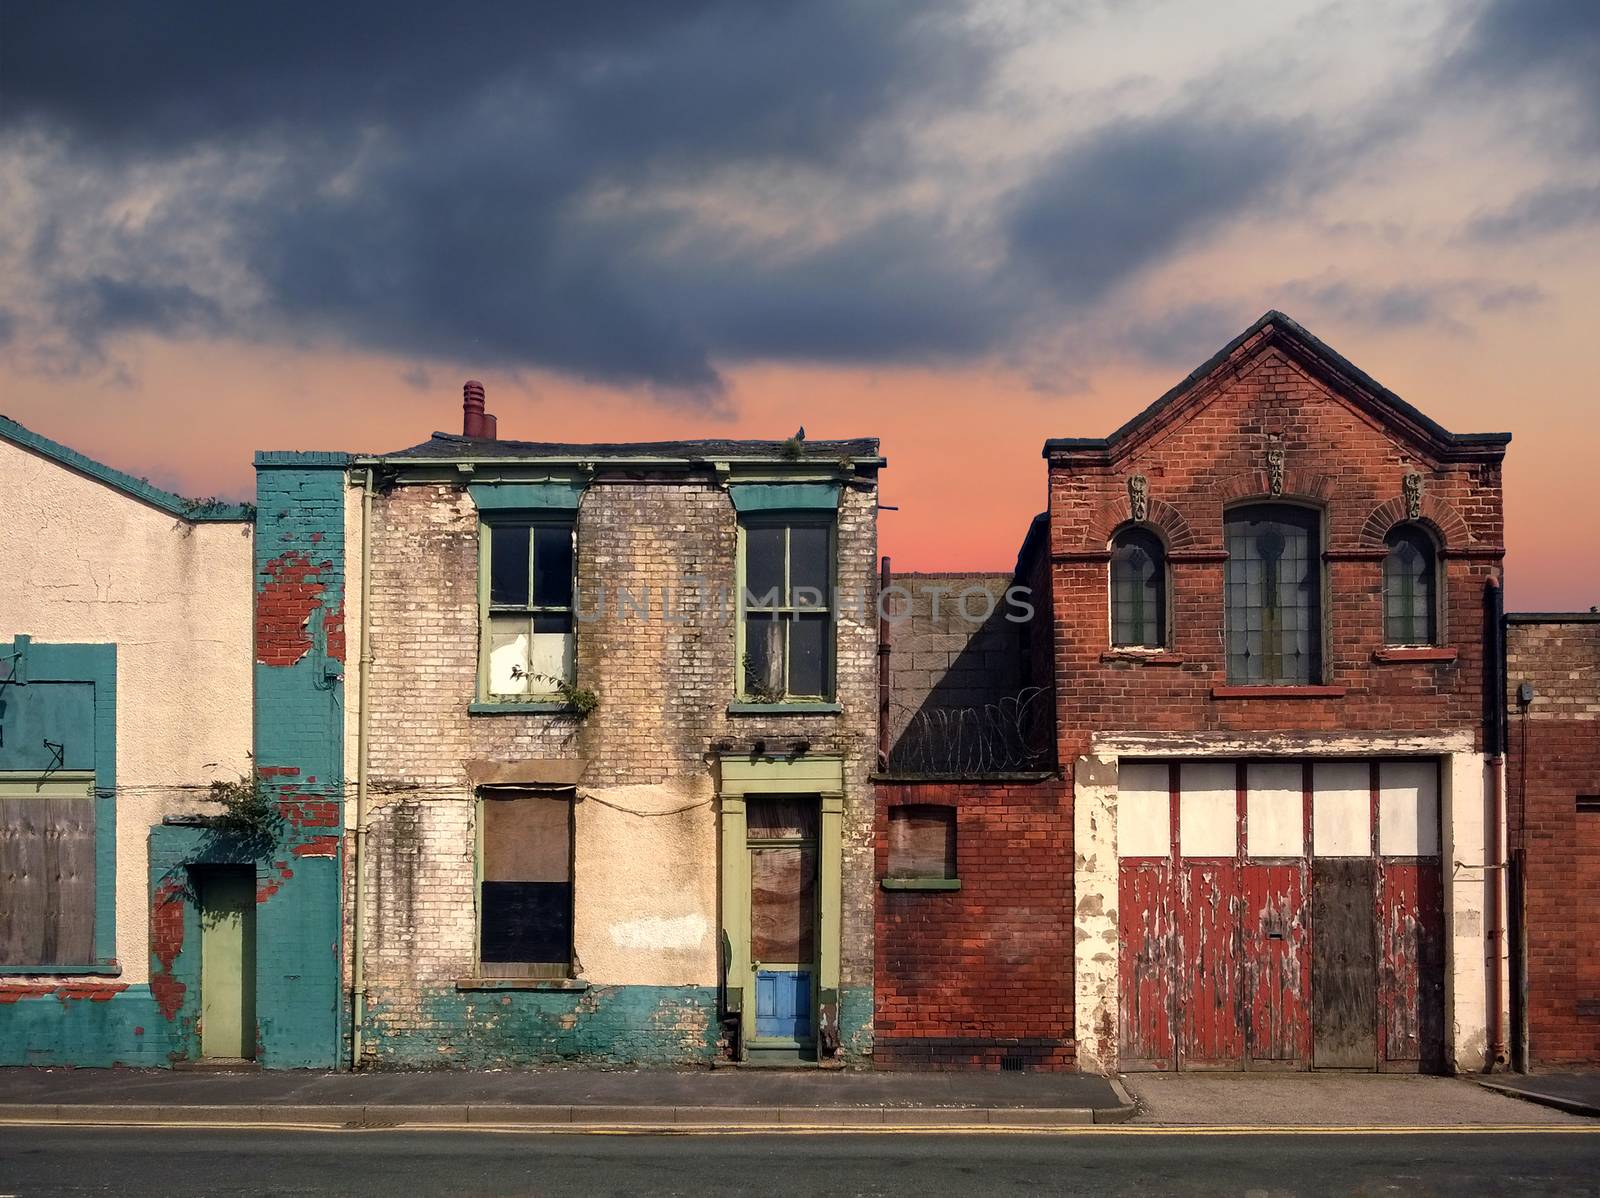 a deserted street of old abandoned ruined houses with bright peeling paint and crumbling brickwork in evening sunlight against a bright cloudy sunset sky redevelopment or fantasy concept